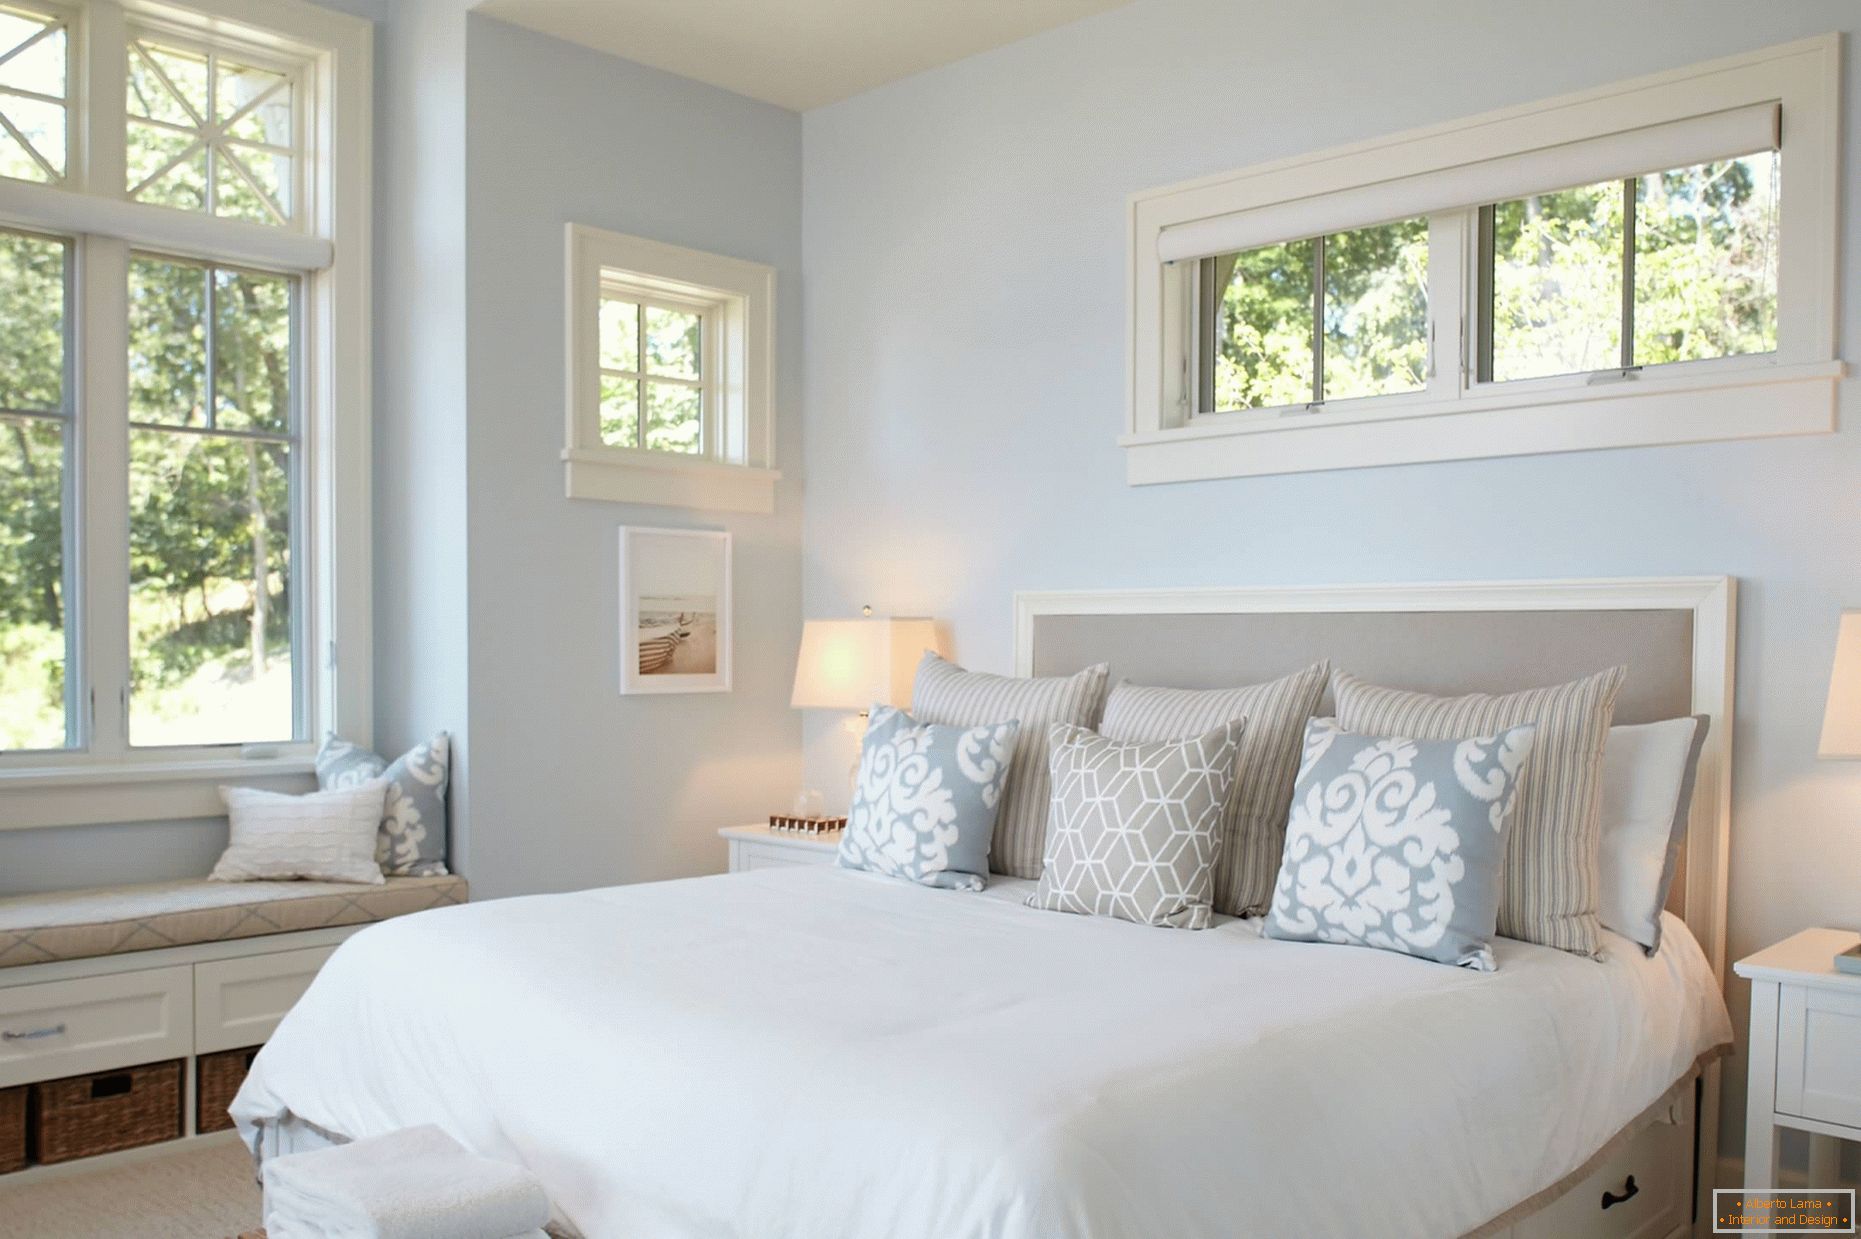 Pastel colors in the interior of the bedroom